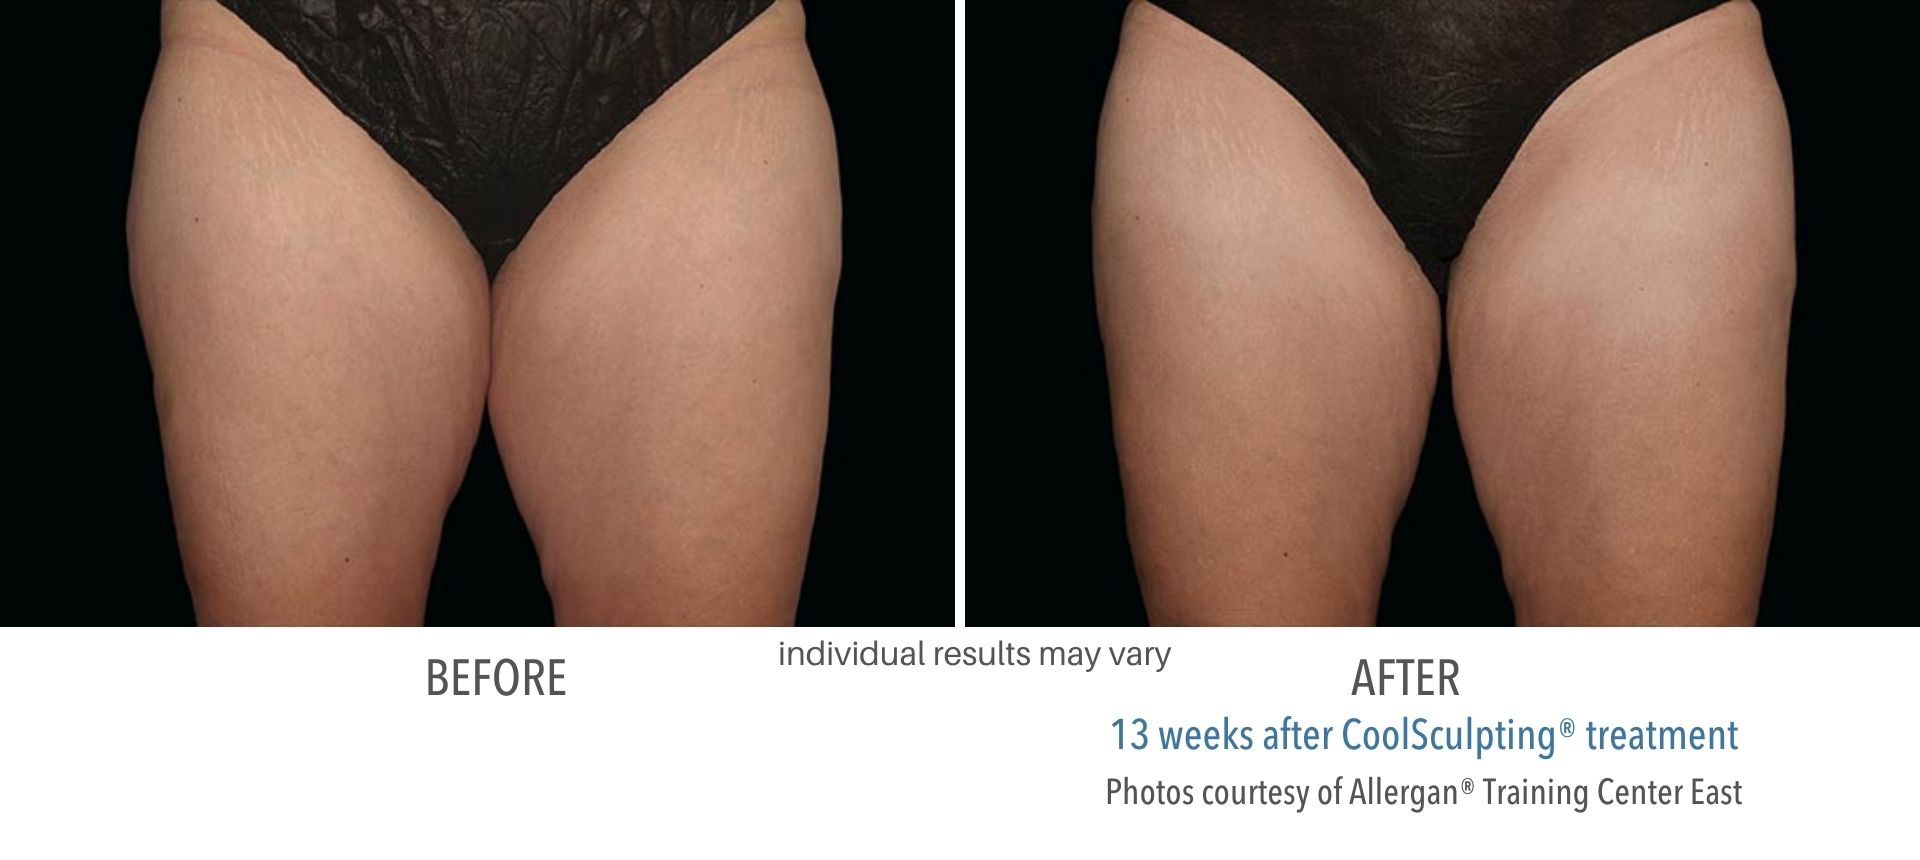 CoolSculpting treatment in thigh area